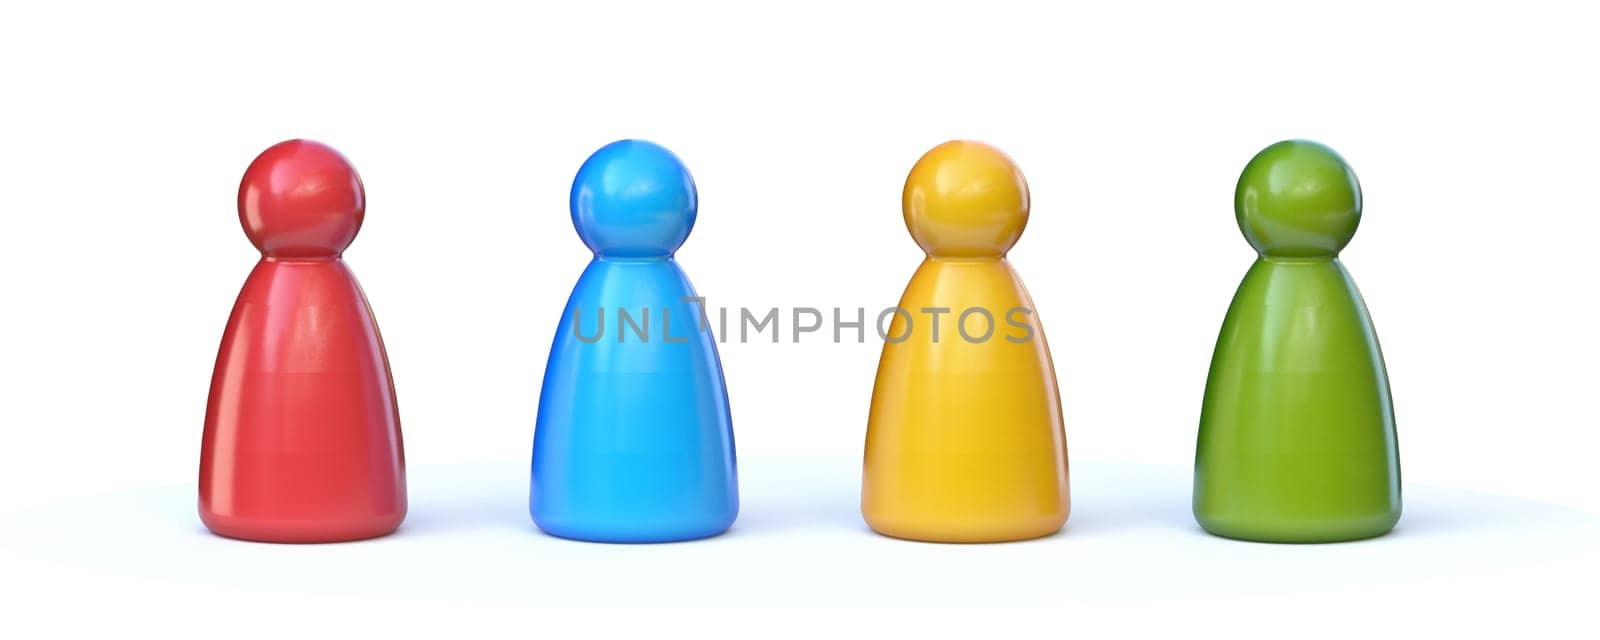 Simple board games pawns 3D rendering illustration isolated on white background